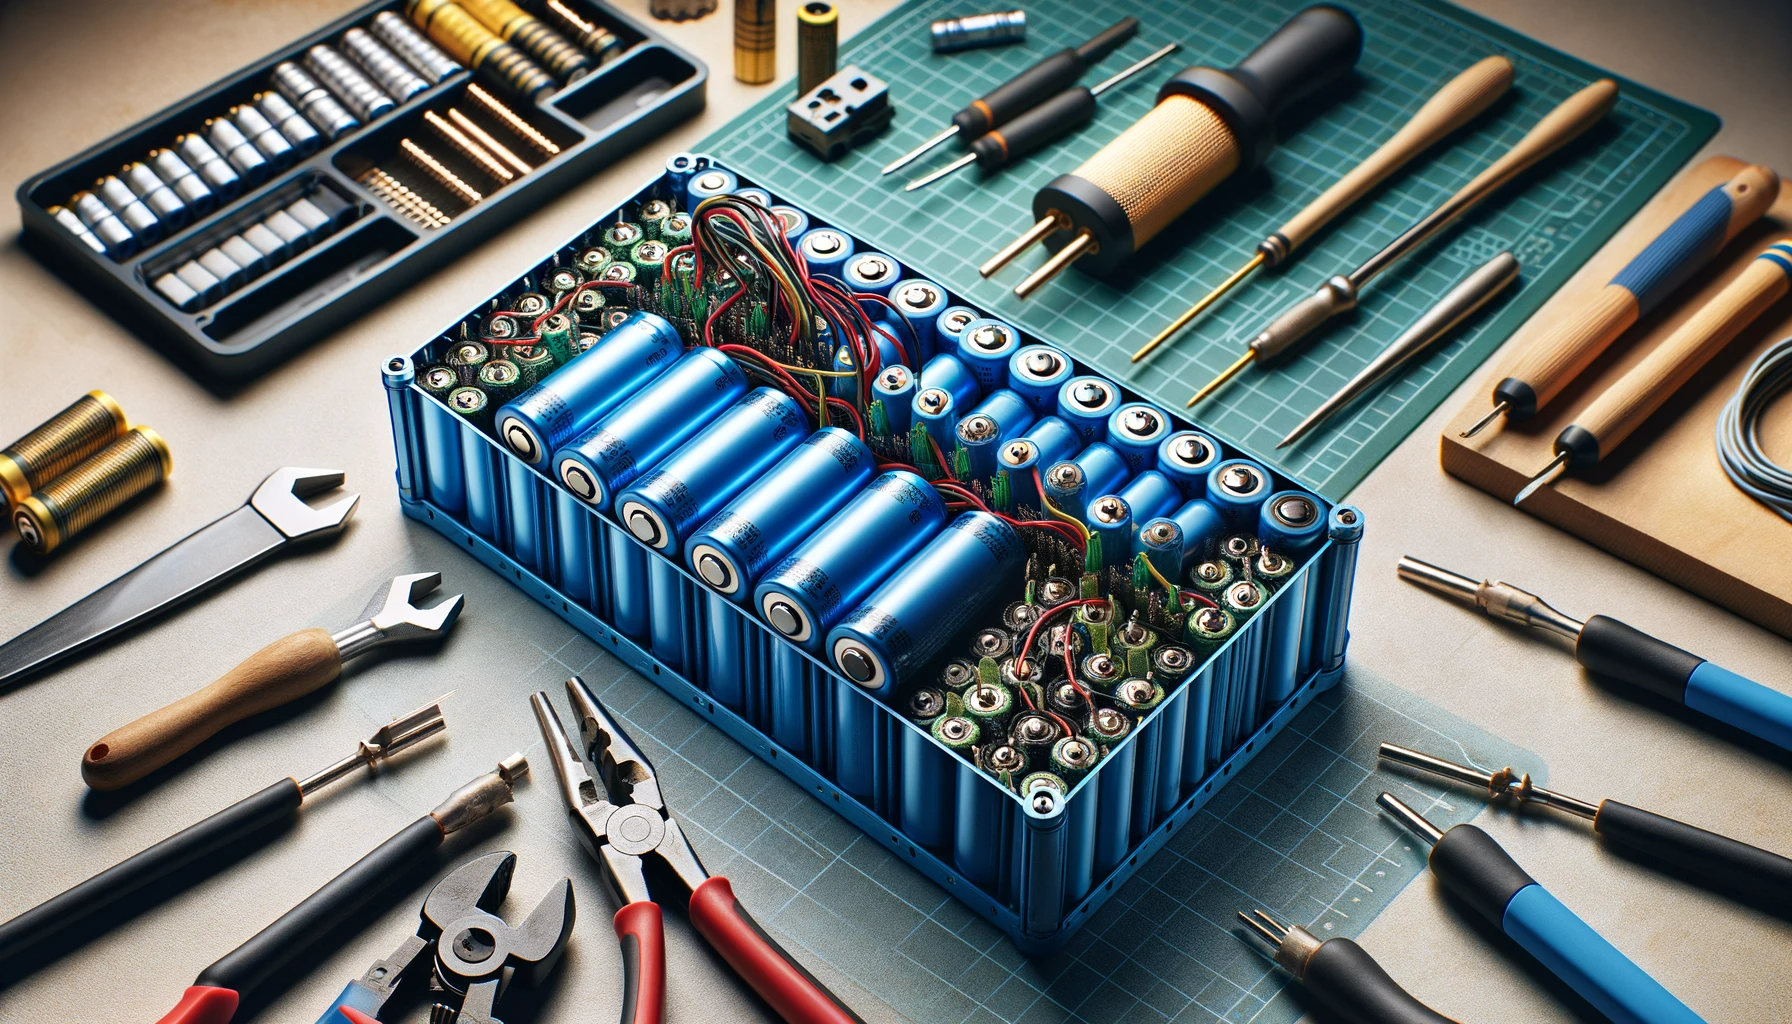 How Do We Make a 18650 Battery Pack?